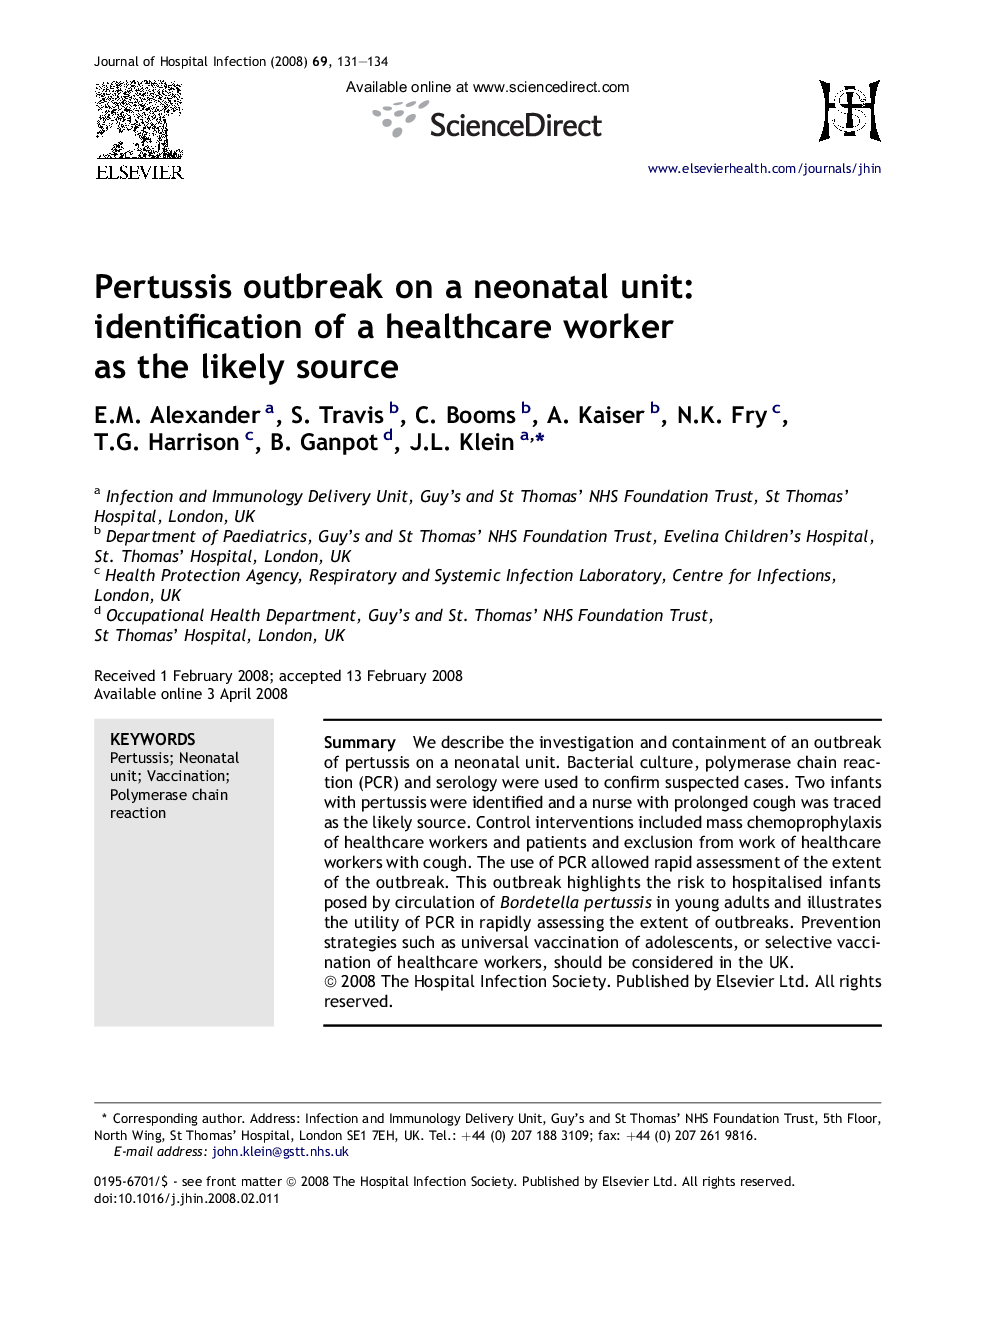 Pertussis outbreak on a neonatal unit: identification of a healthcare worker as the likely source